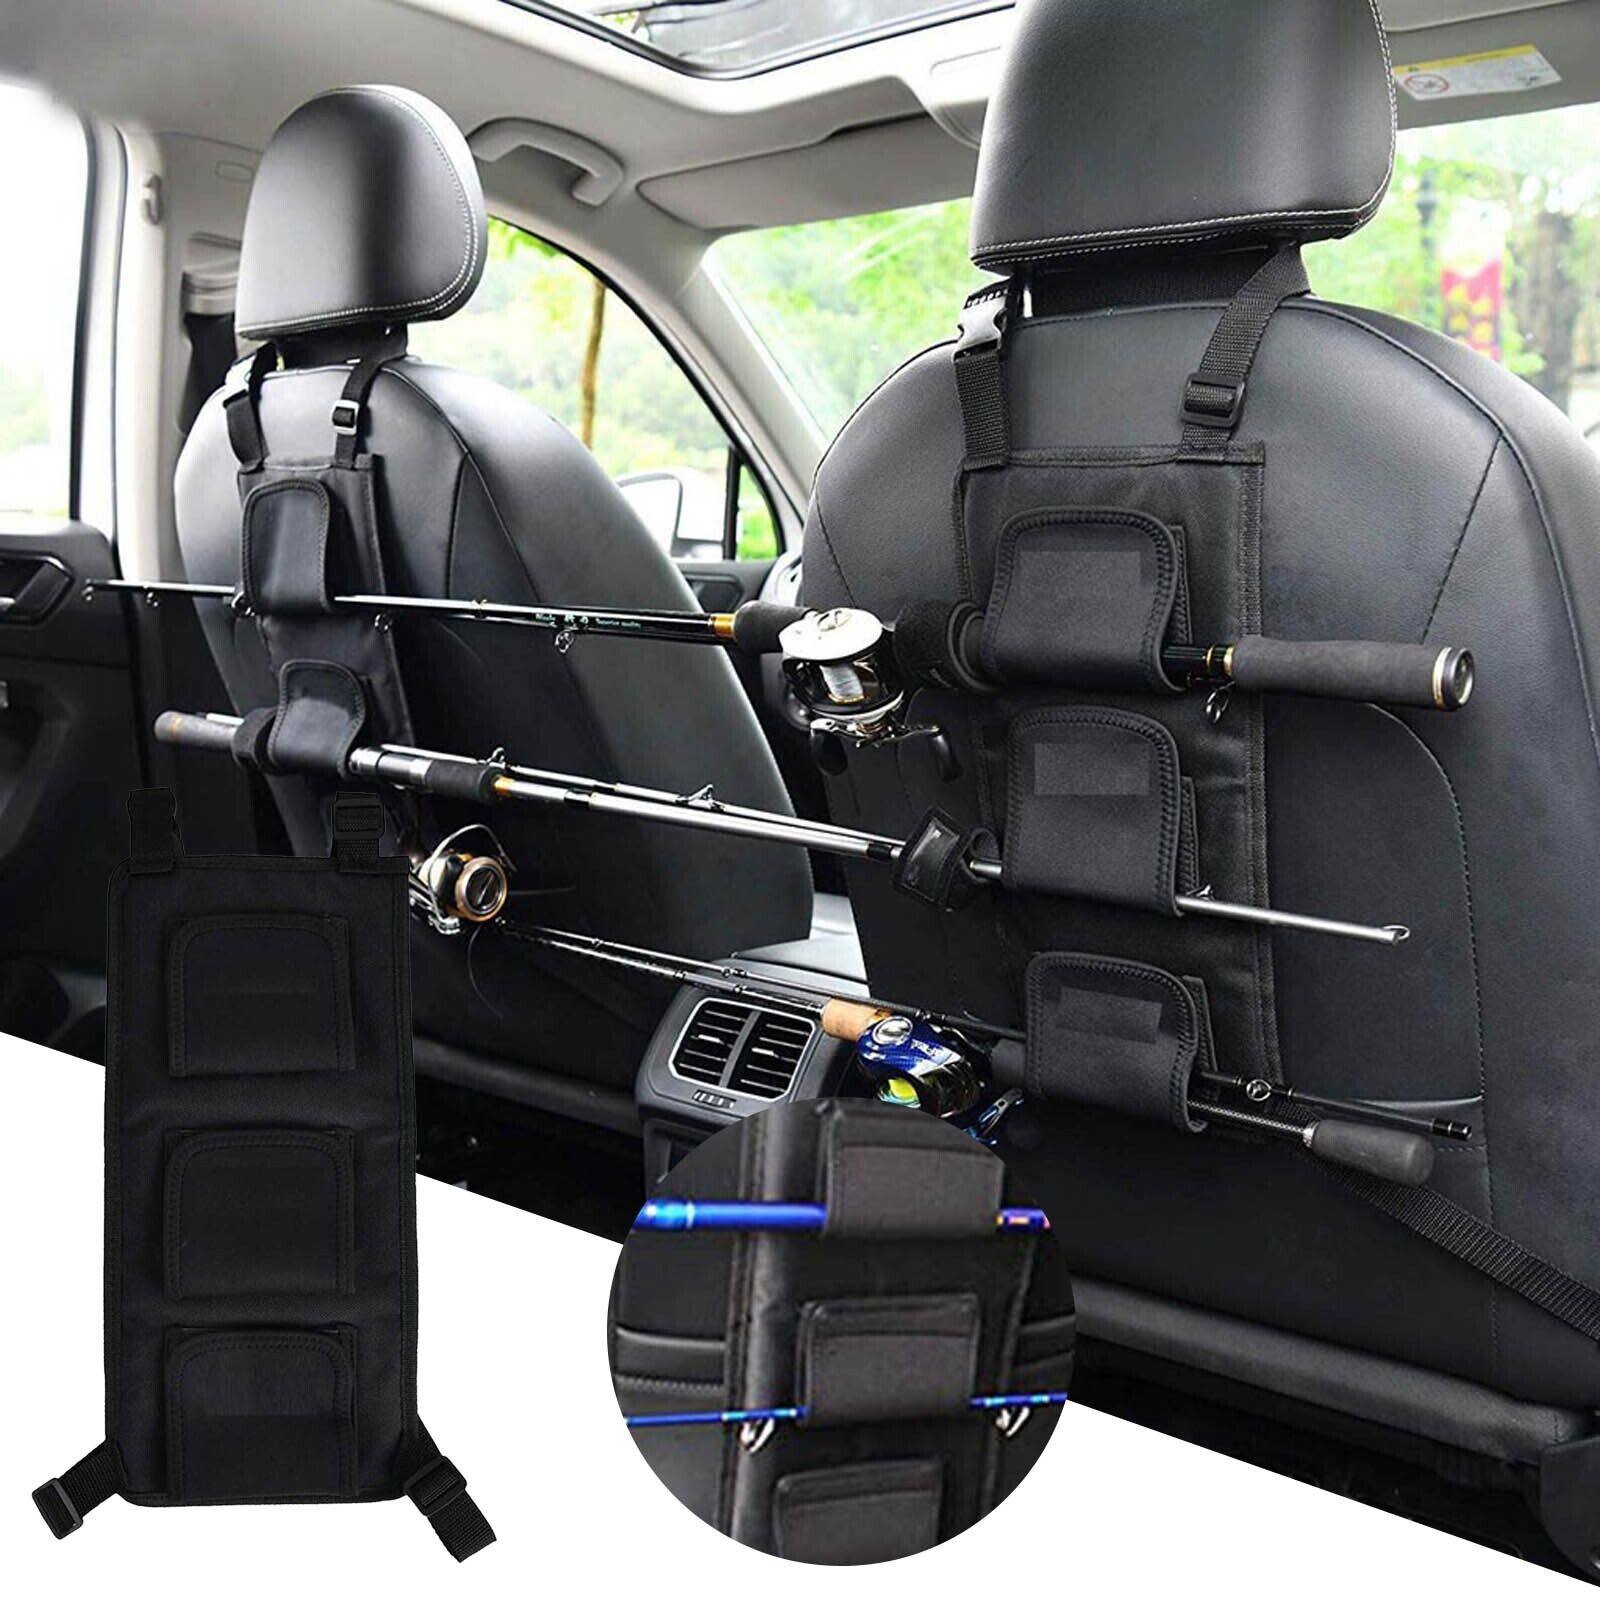 Vehicle Fishing Rod Holder 86.6 Inches Length Adjustable Polyester Strap